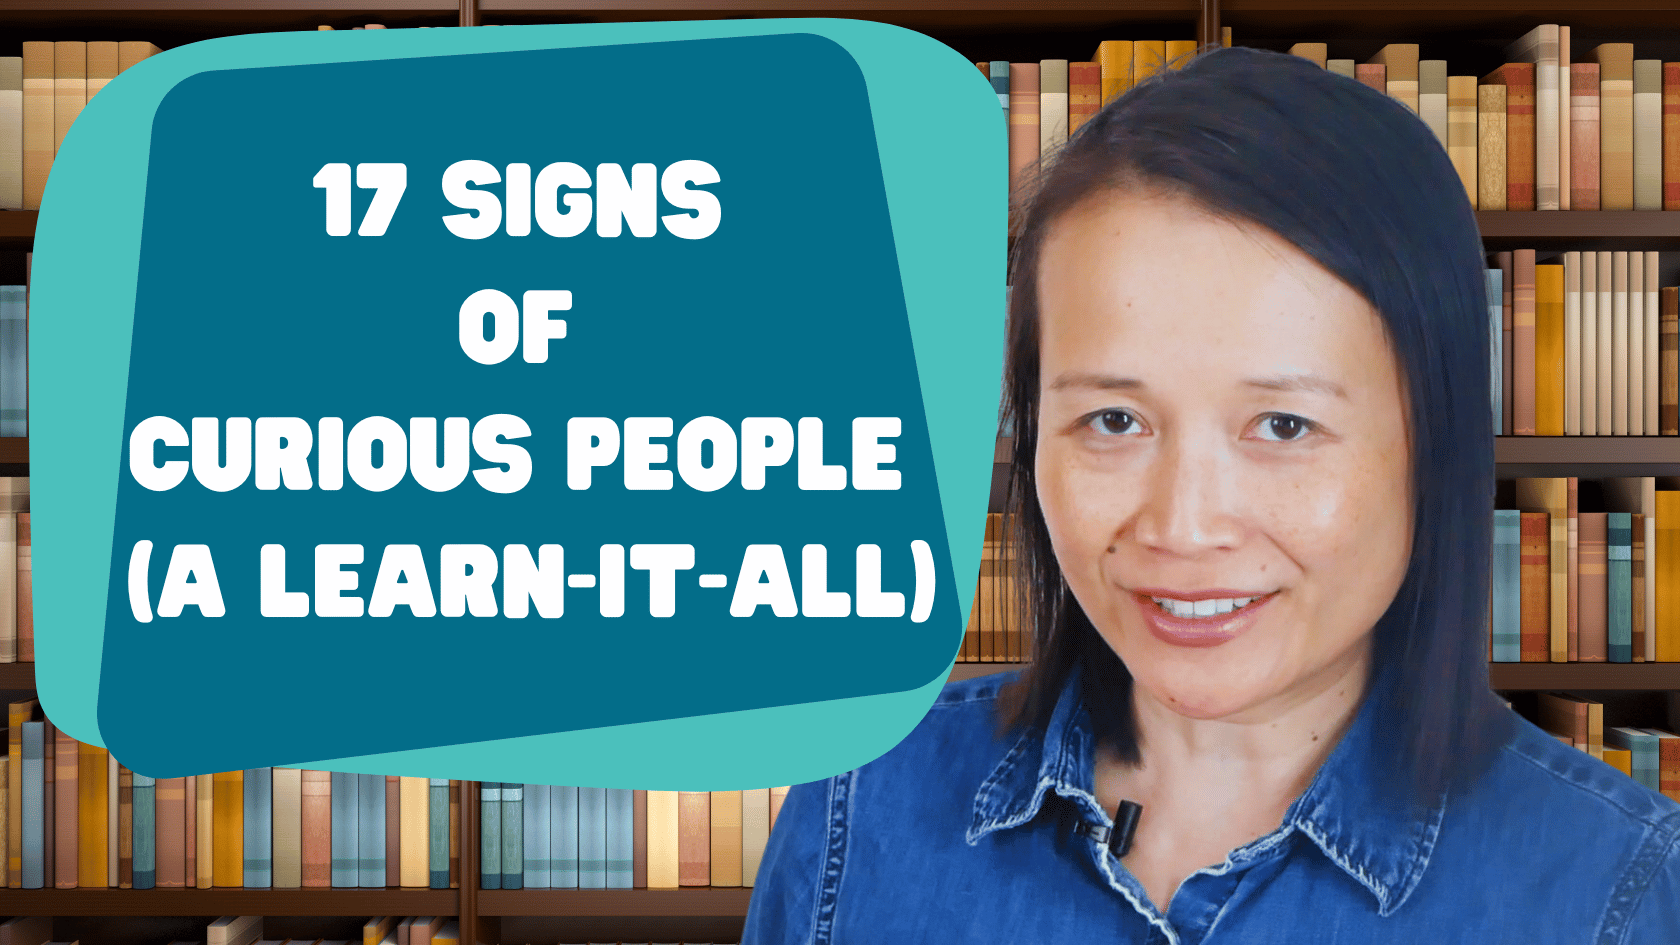 17 Signs of Curious People (A Learn-It-All)